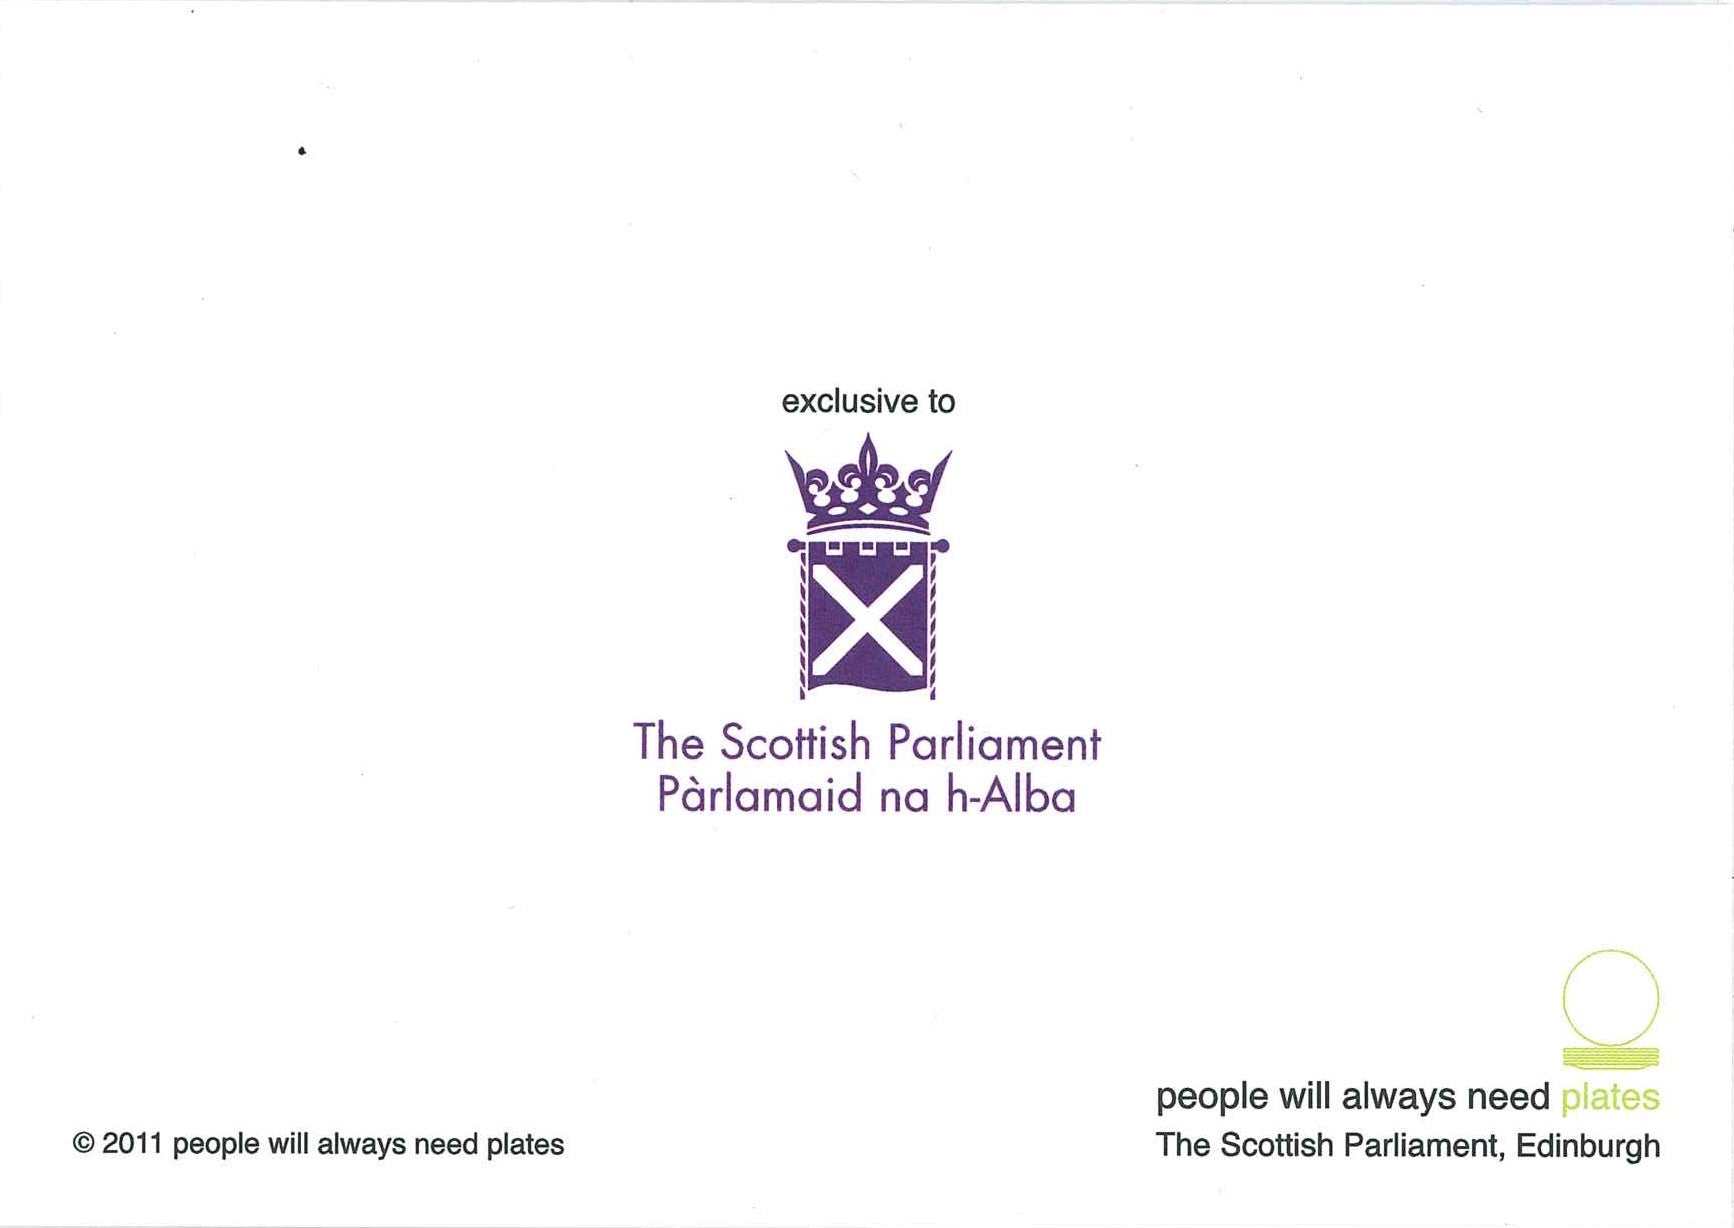 The reverse of the card with the symbol of the parliament.